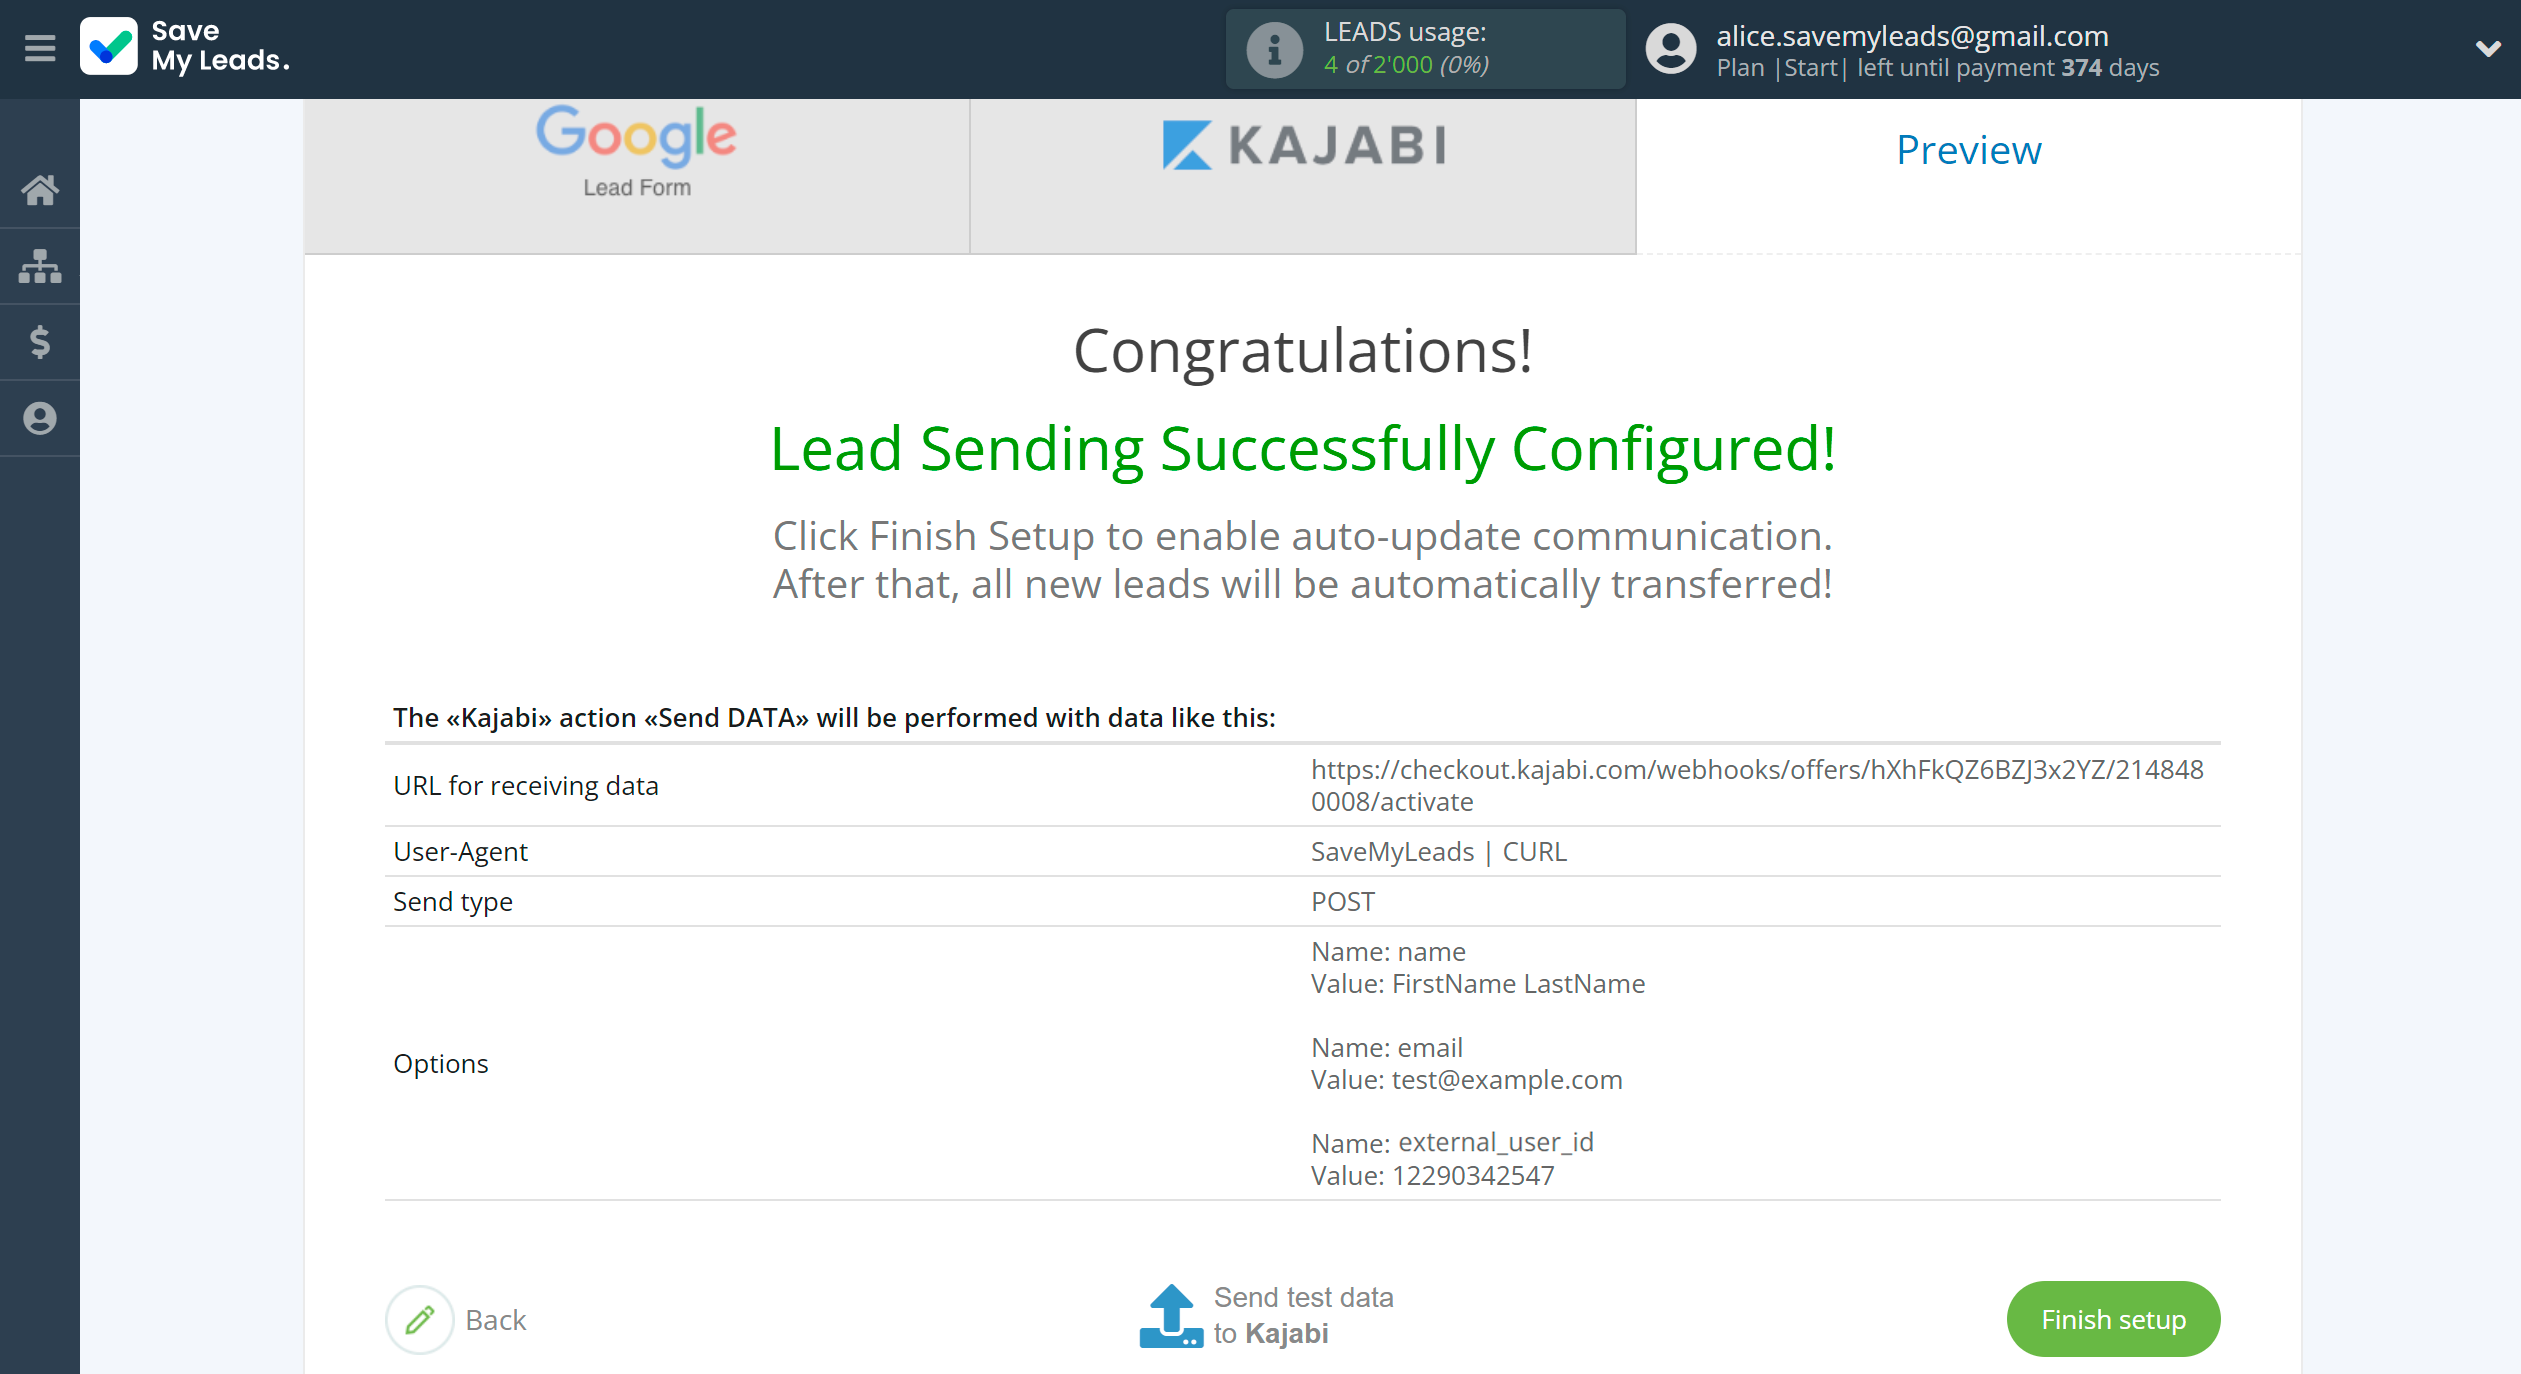 How to Connect Google Lead Form with Kajabi | Test data